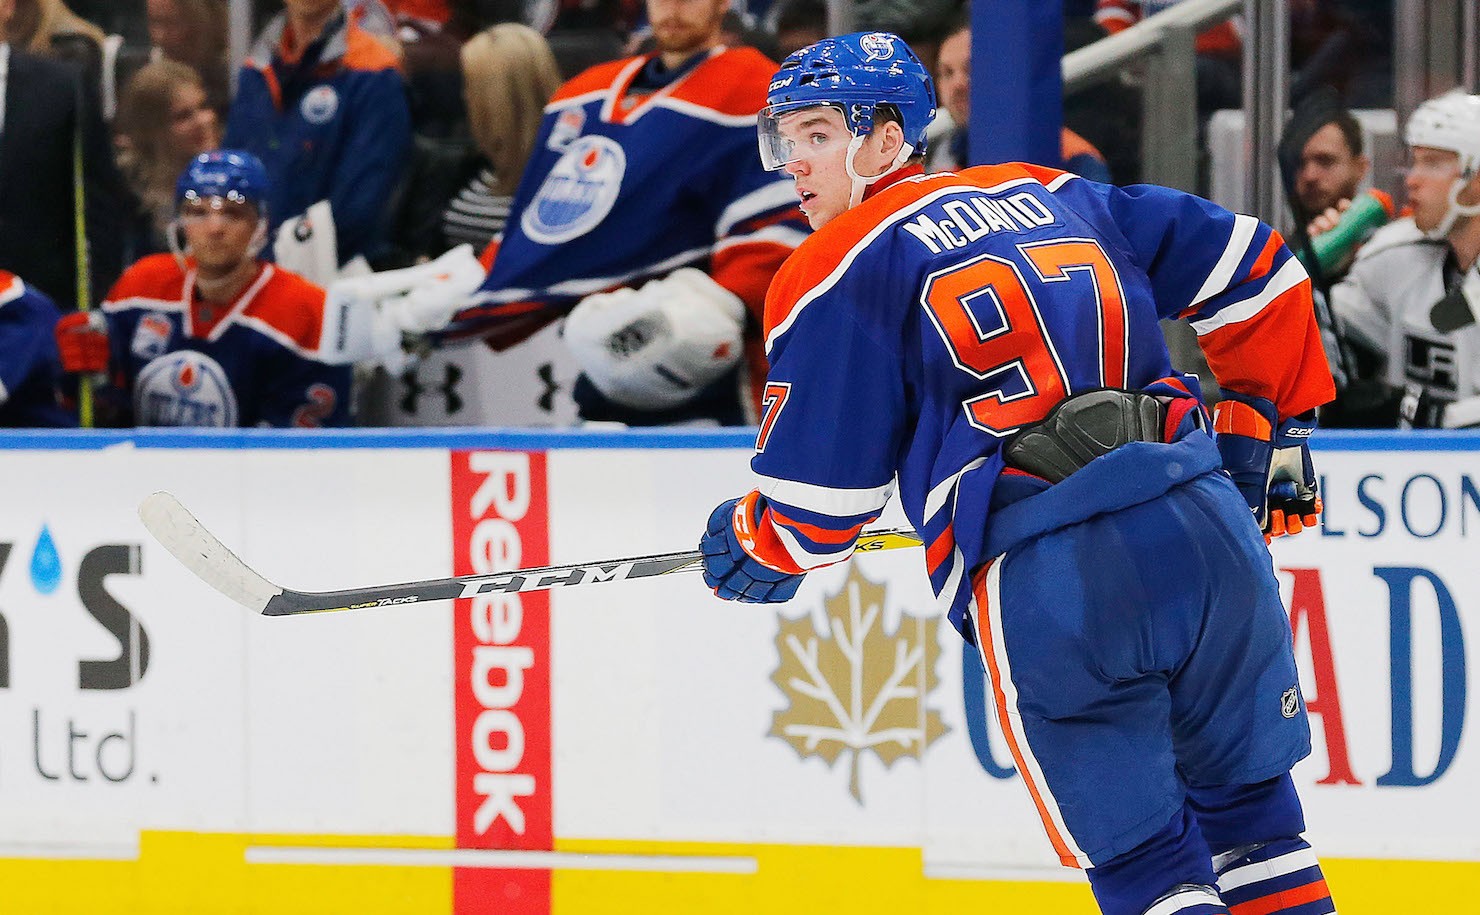 Connor McDavid is Set to Become NHL's Highest-Paid Player